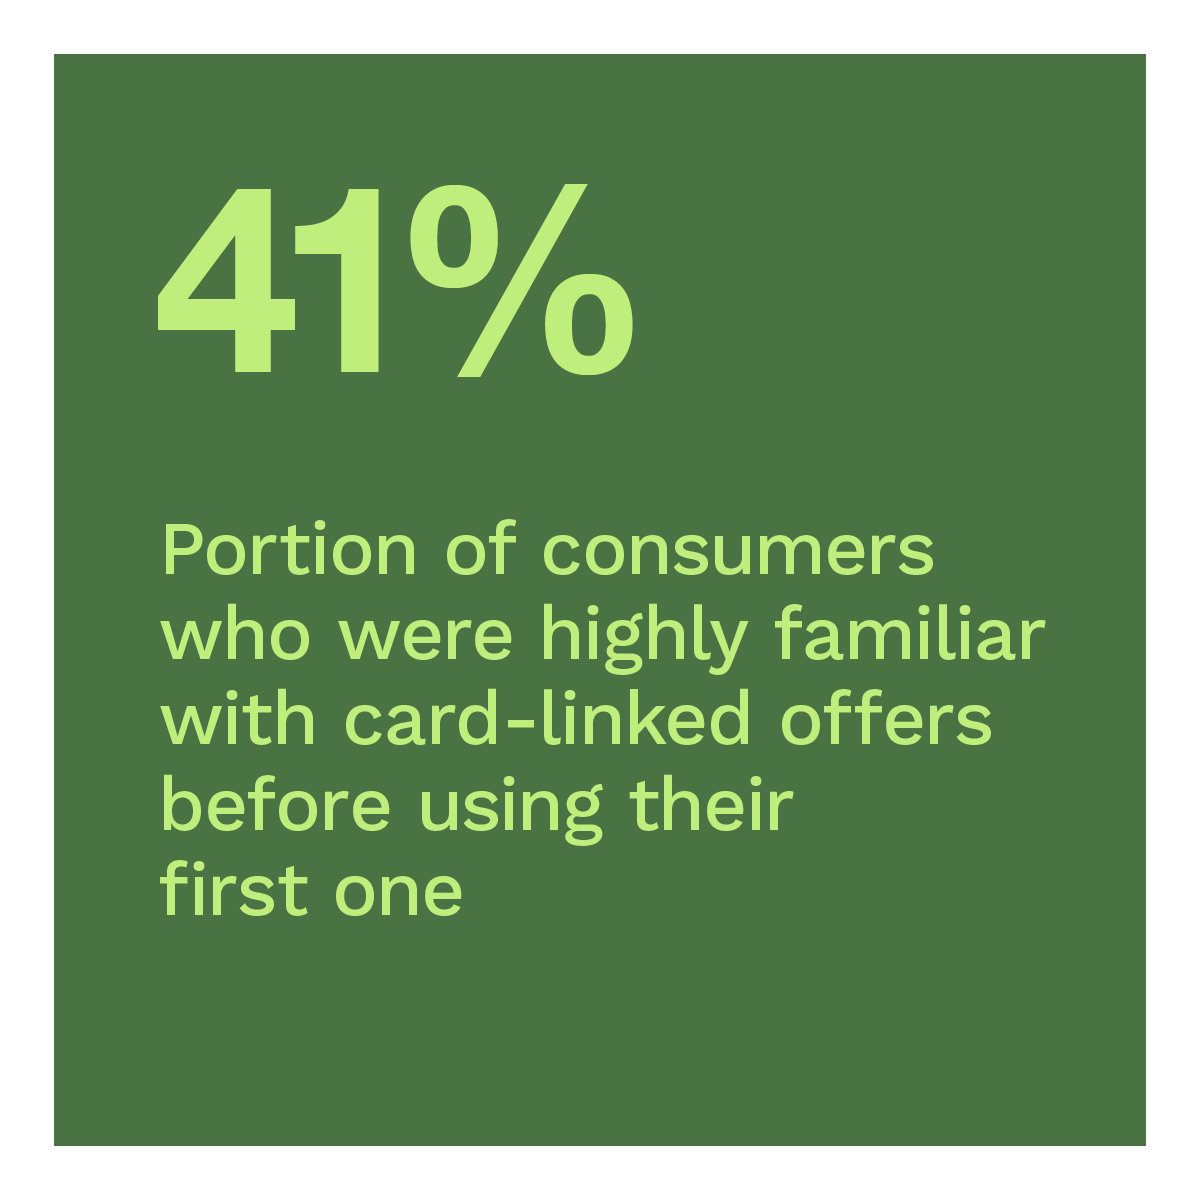 41%: Portion of consumers who were highly familiar with card-linked offers before using their first one